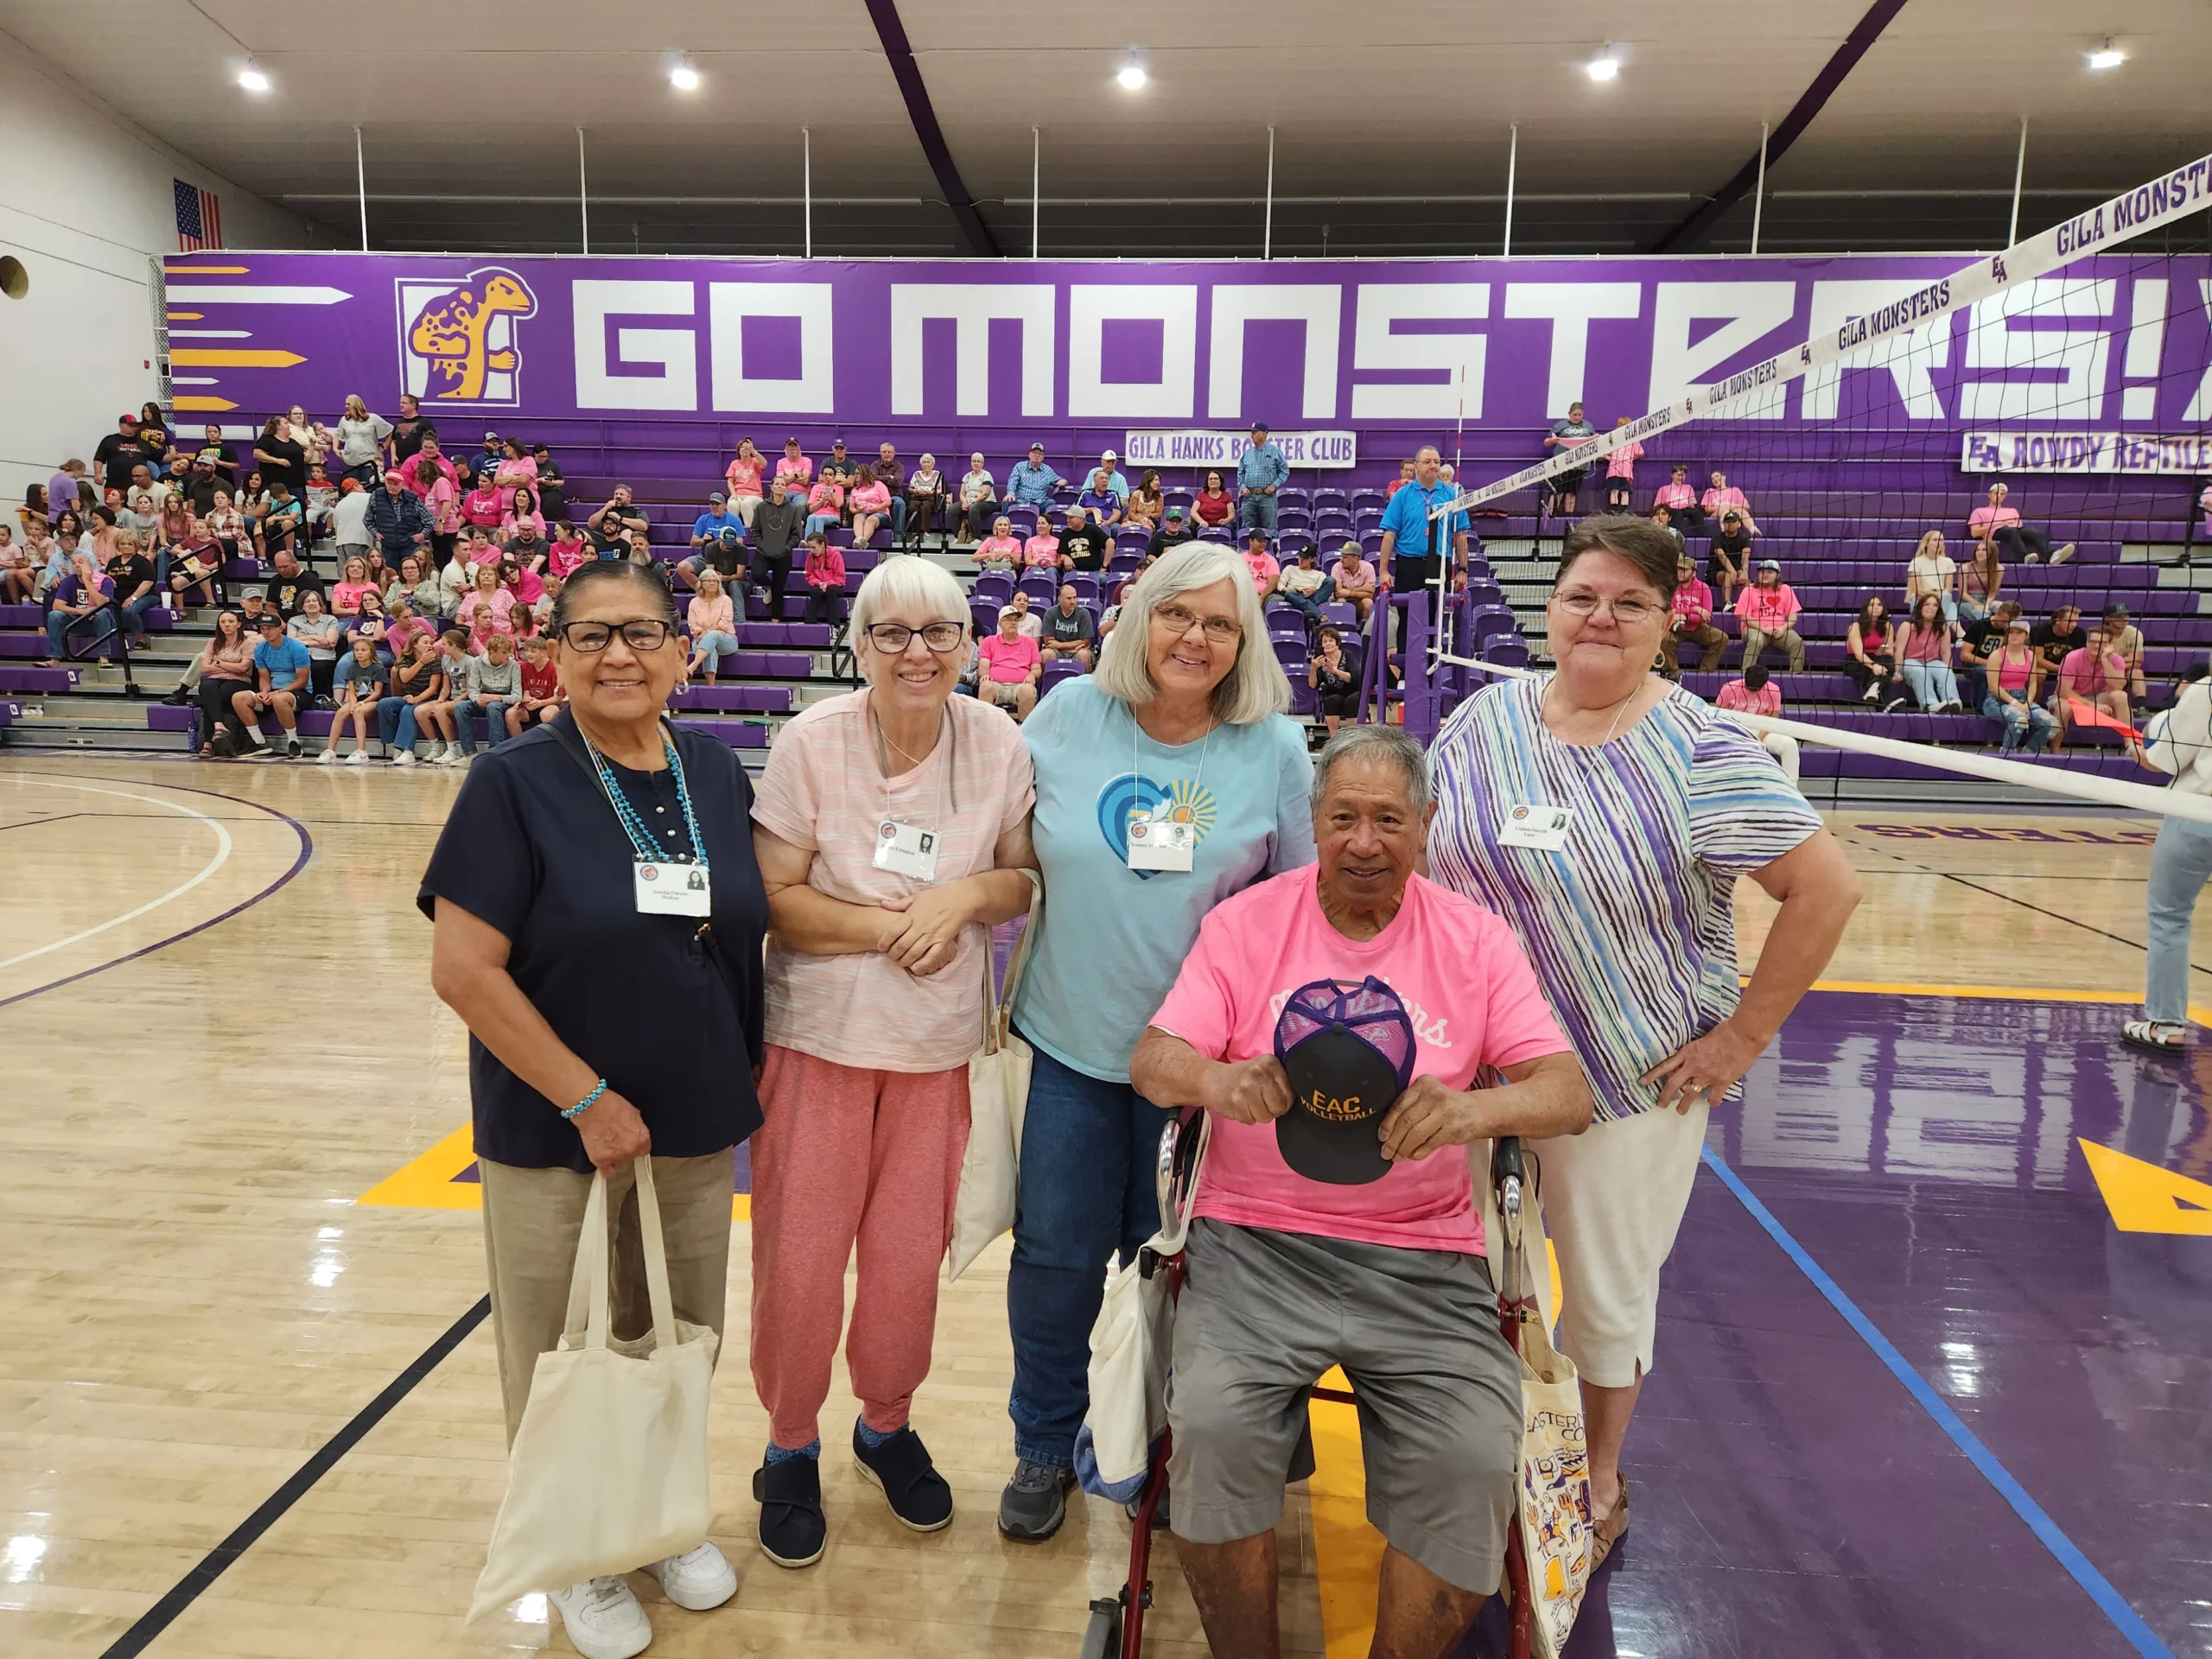 Eastern Arizona College’s 1973 Volleyball Team was honored for winning the AIAW national championship 50 years ago at a recent Gila Monster game against Pima Community College. Team members in attendance include: Amelia Owens Holtsoi, Janice Edington, Yvonne Johnson, Colleen Merrill Lunt, and Coach Gerry Hekekia.